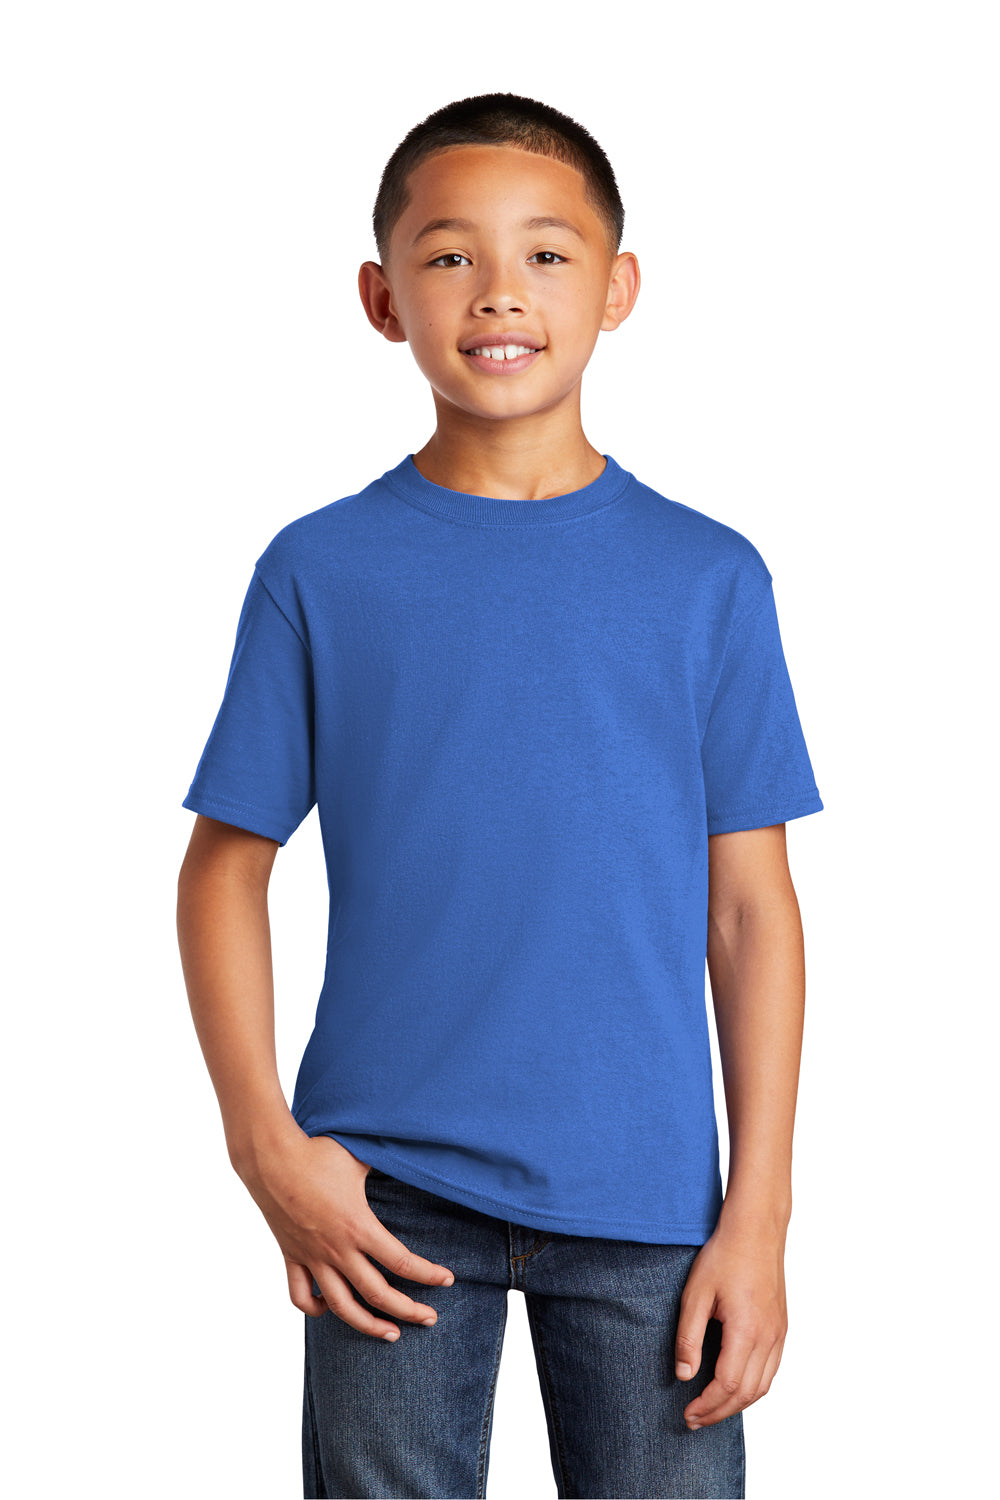 Port & Company PC54Y Youth Core Short Sleeve Crewneck T-Shirt Royal Blue Front